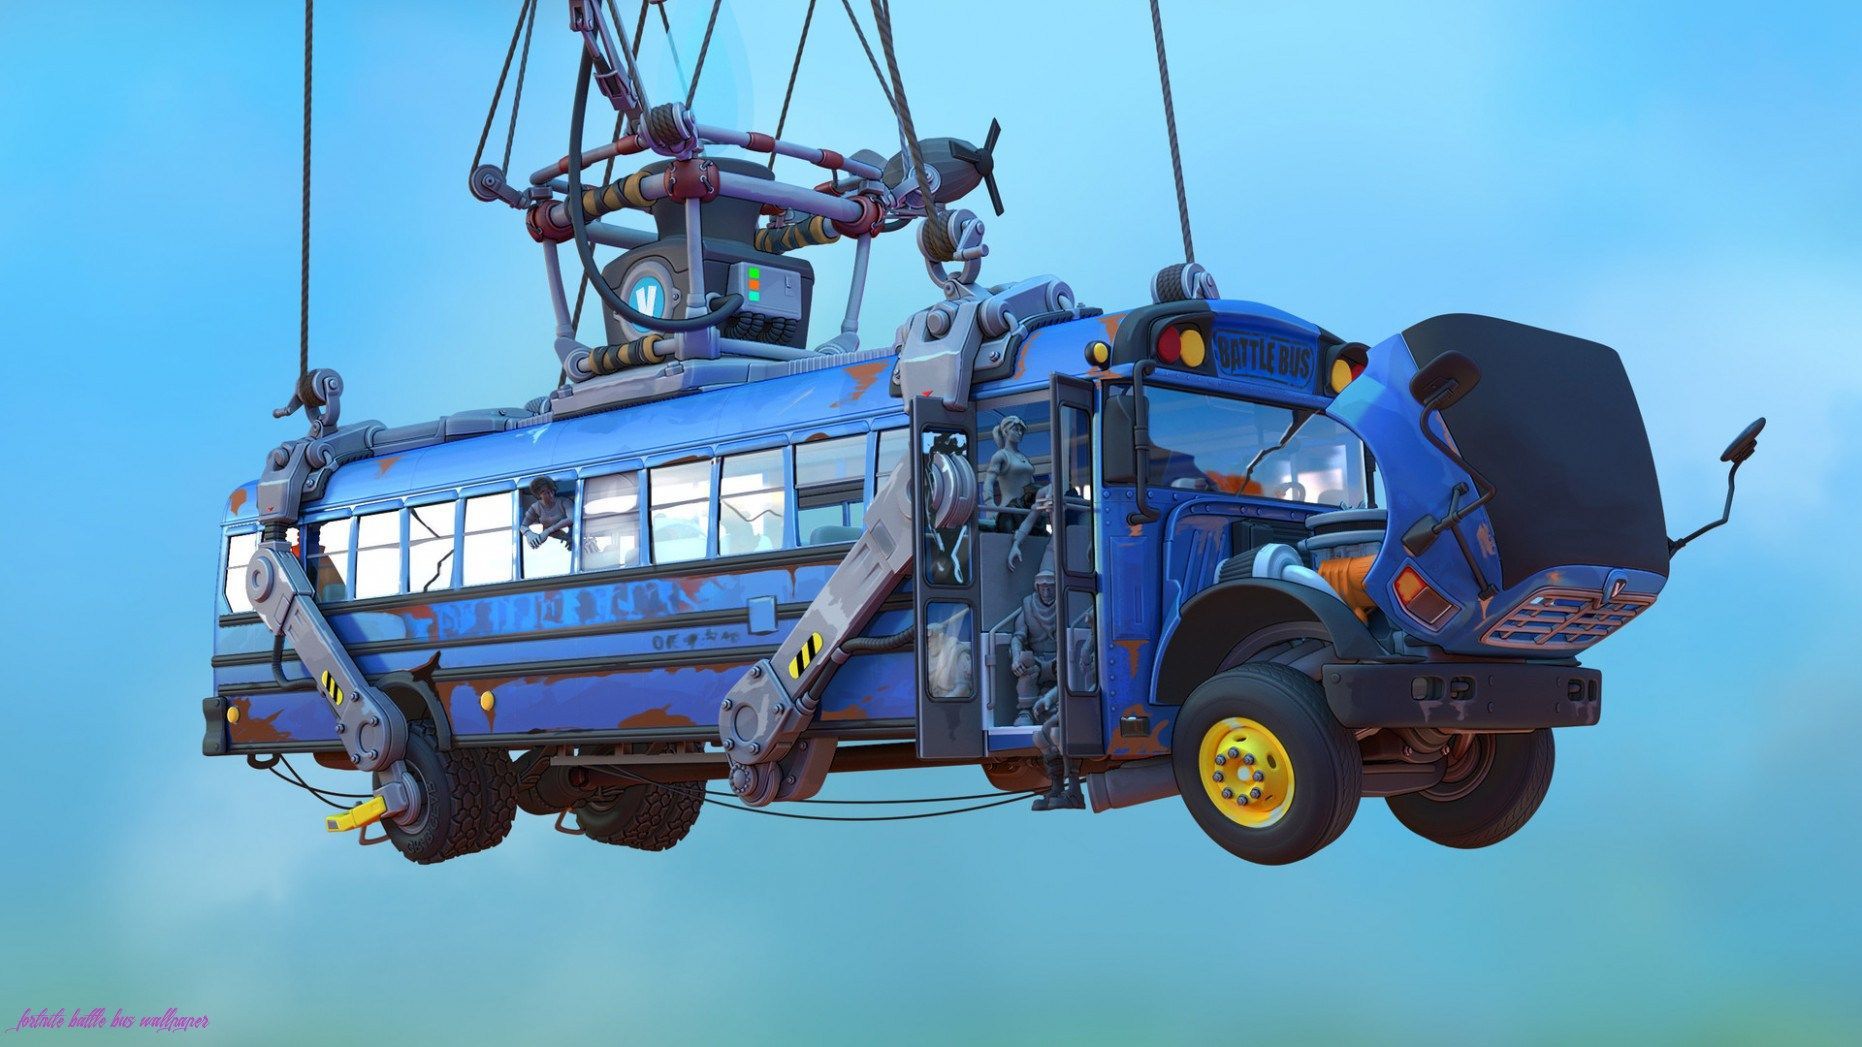 Learn The Truth About Fortnite Battle Bus Wallpaper In The Next 13 Seconds. Fortnite Battle Bus Wallpaper. Fortnite, Bus, Battle